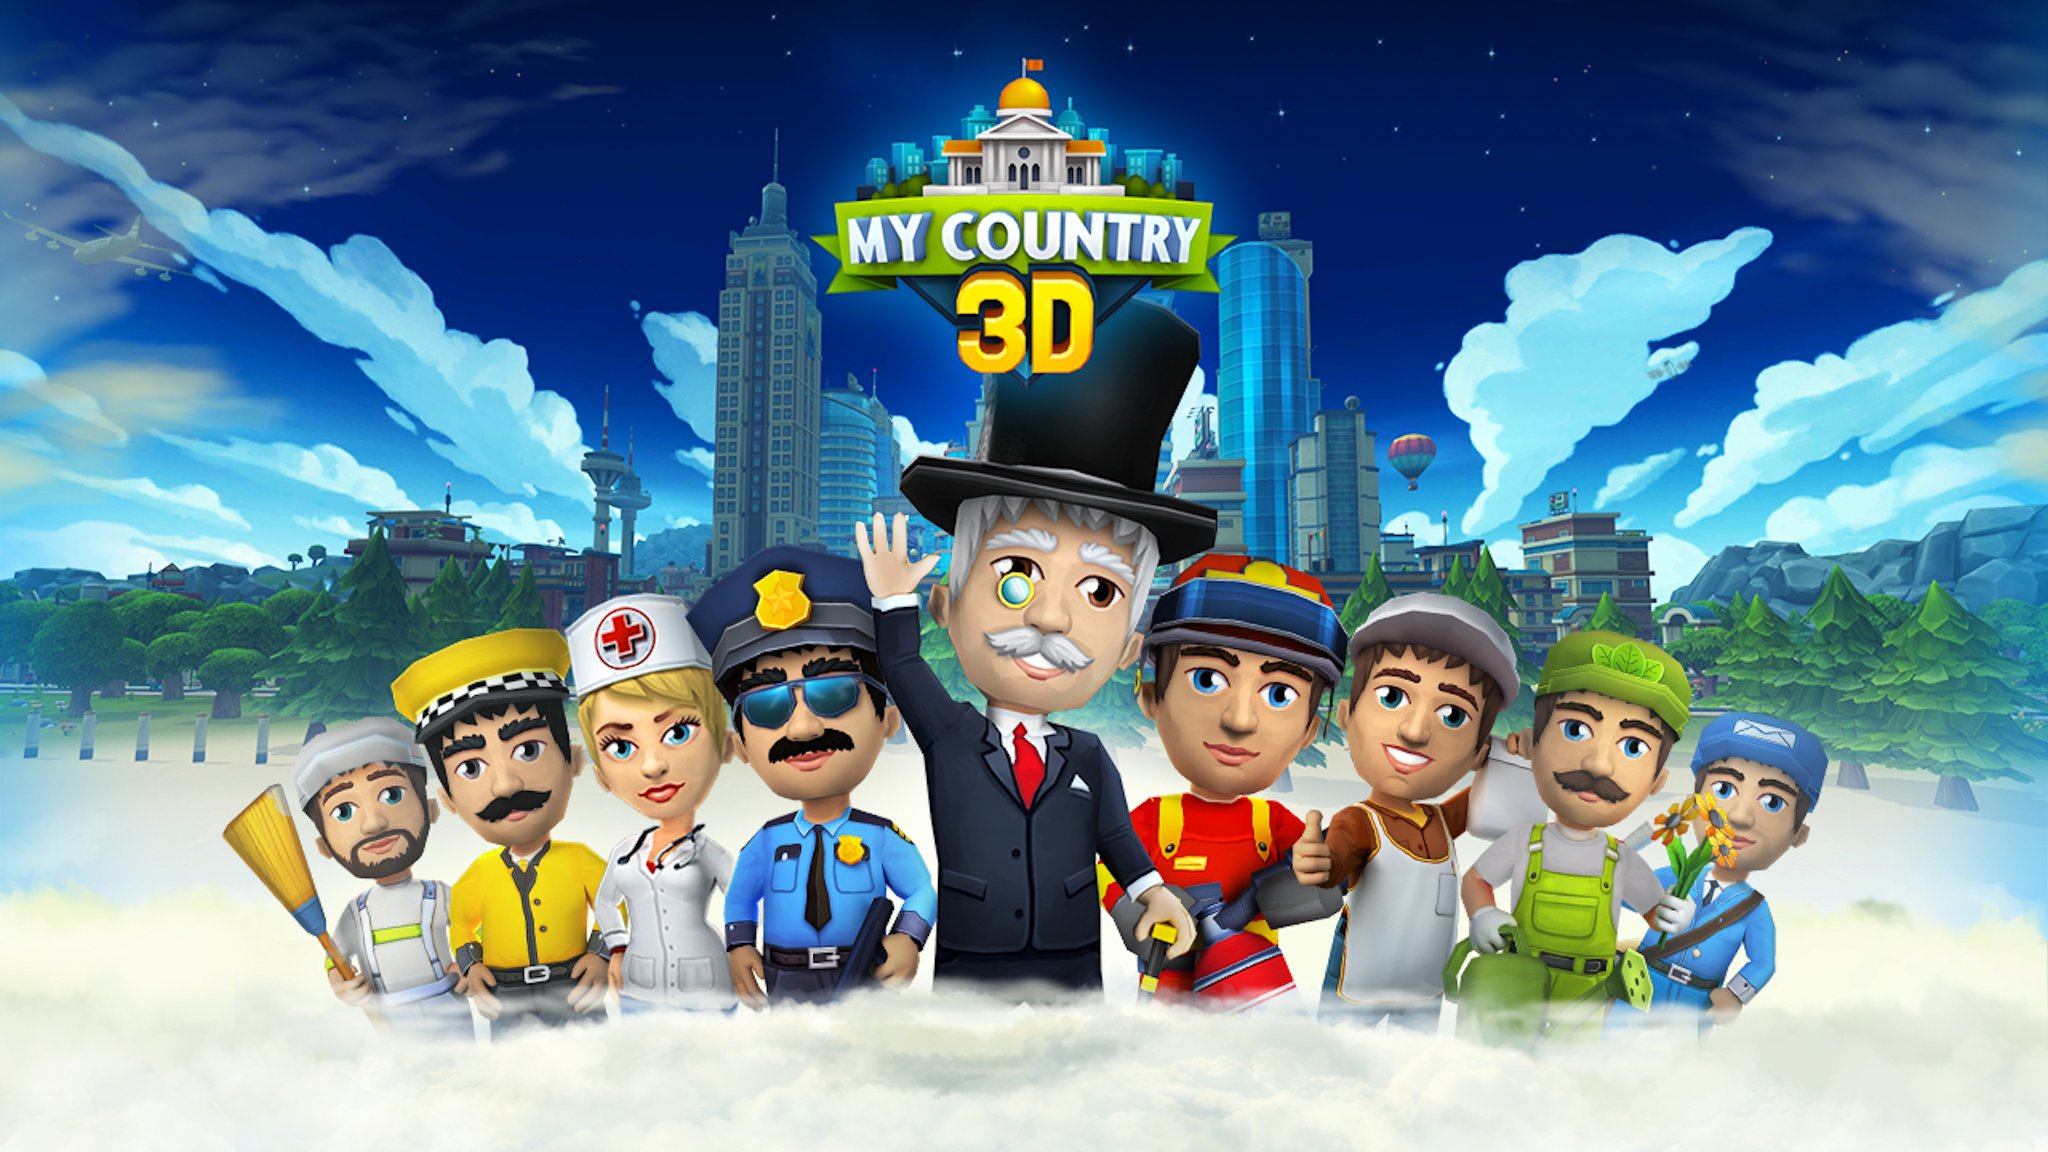 My Country 3D